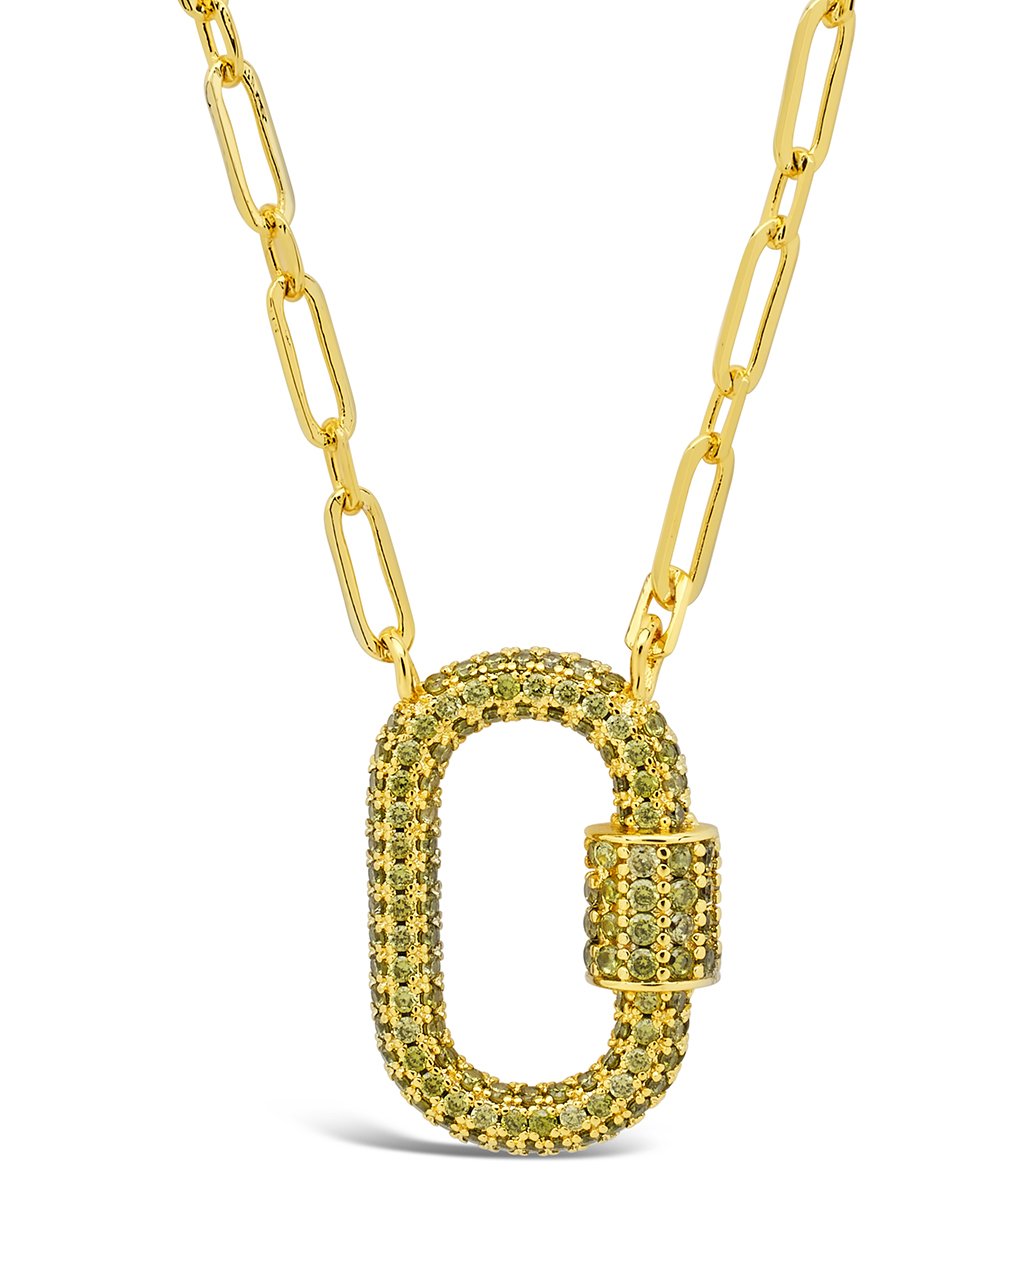 Pave CZ Carabiner Lock Necklace Necklace Sterling Forever Gold Green